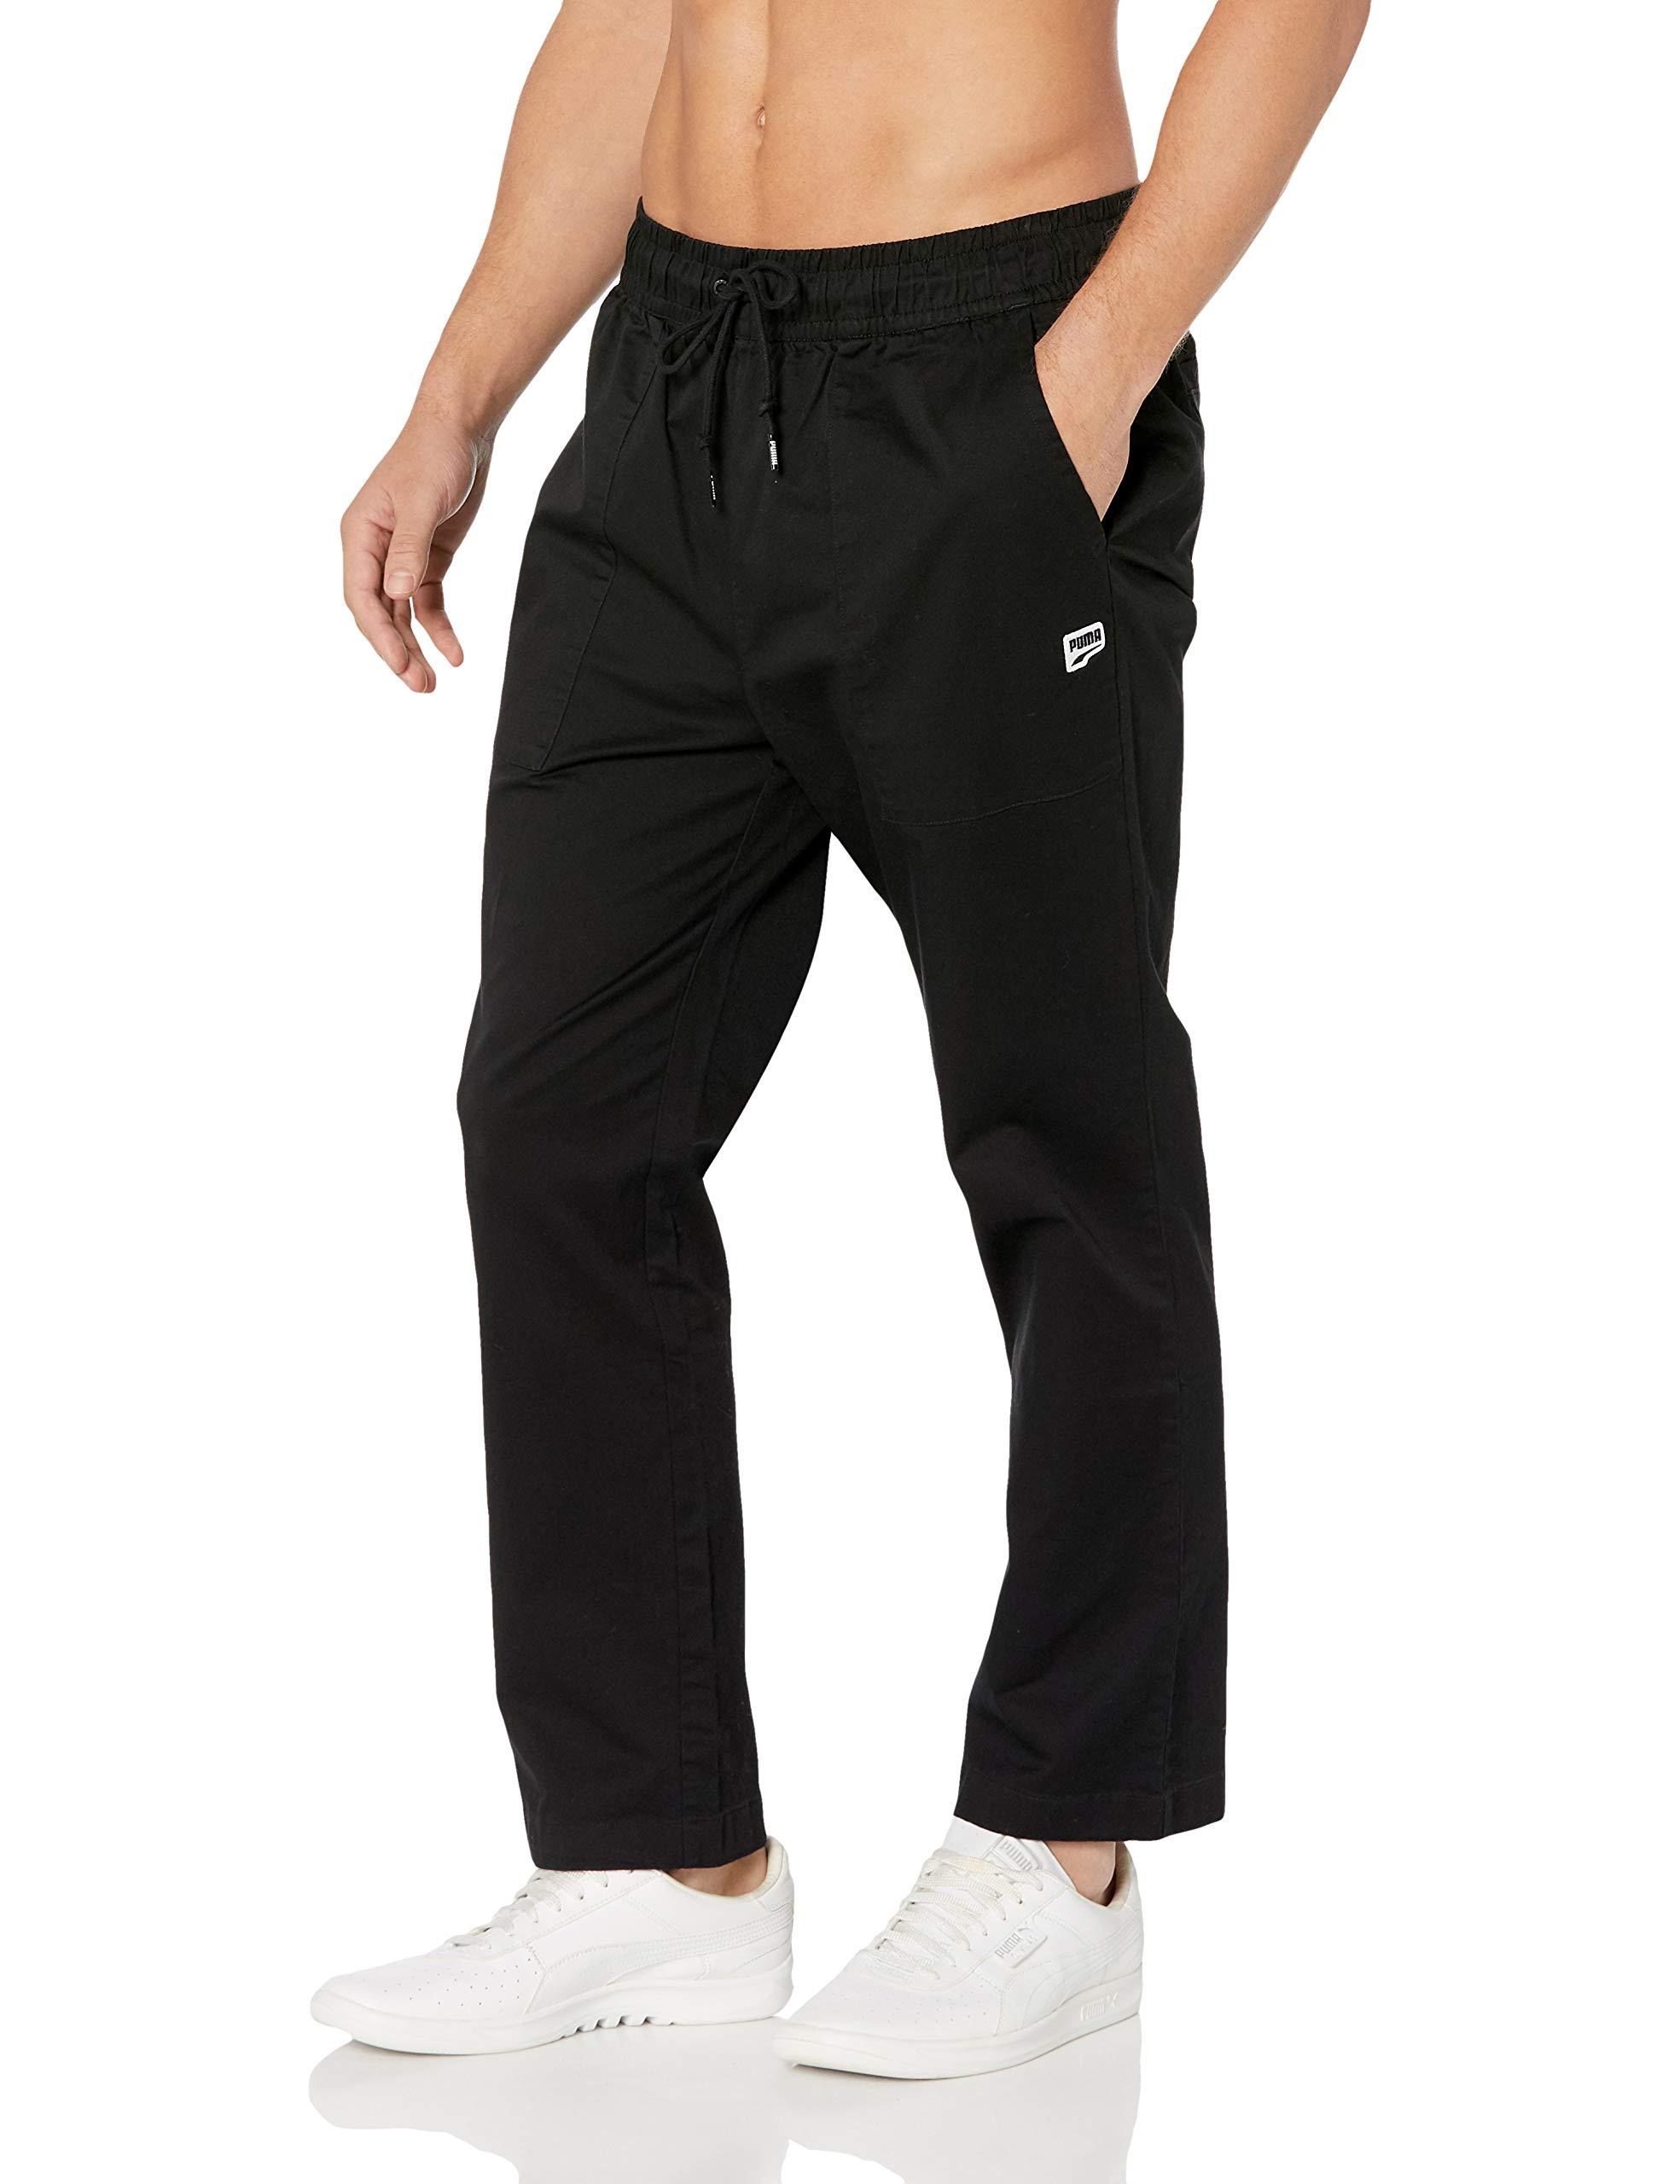 PUMA Downtown Twill Pants in Black for Men - Lyst